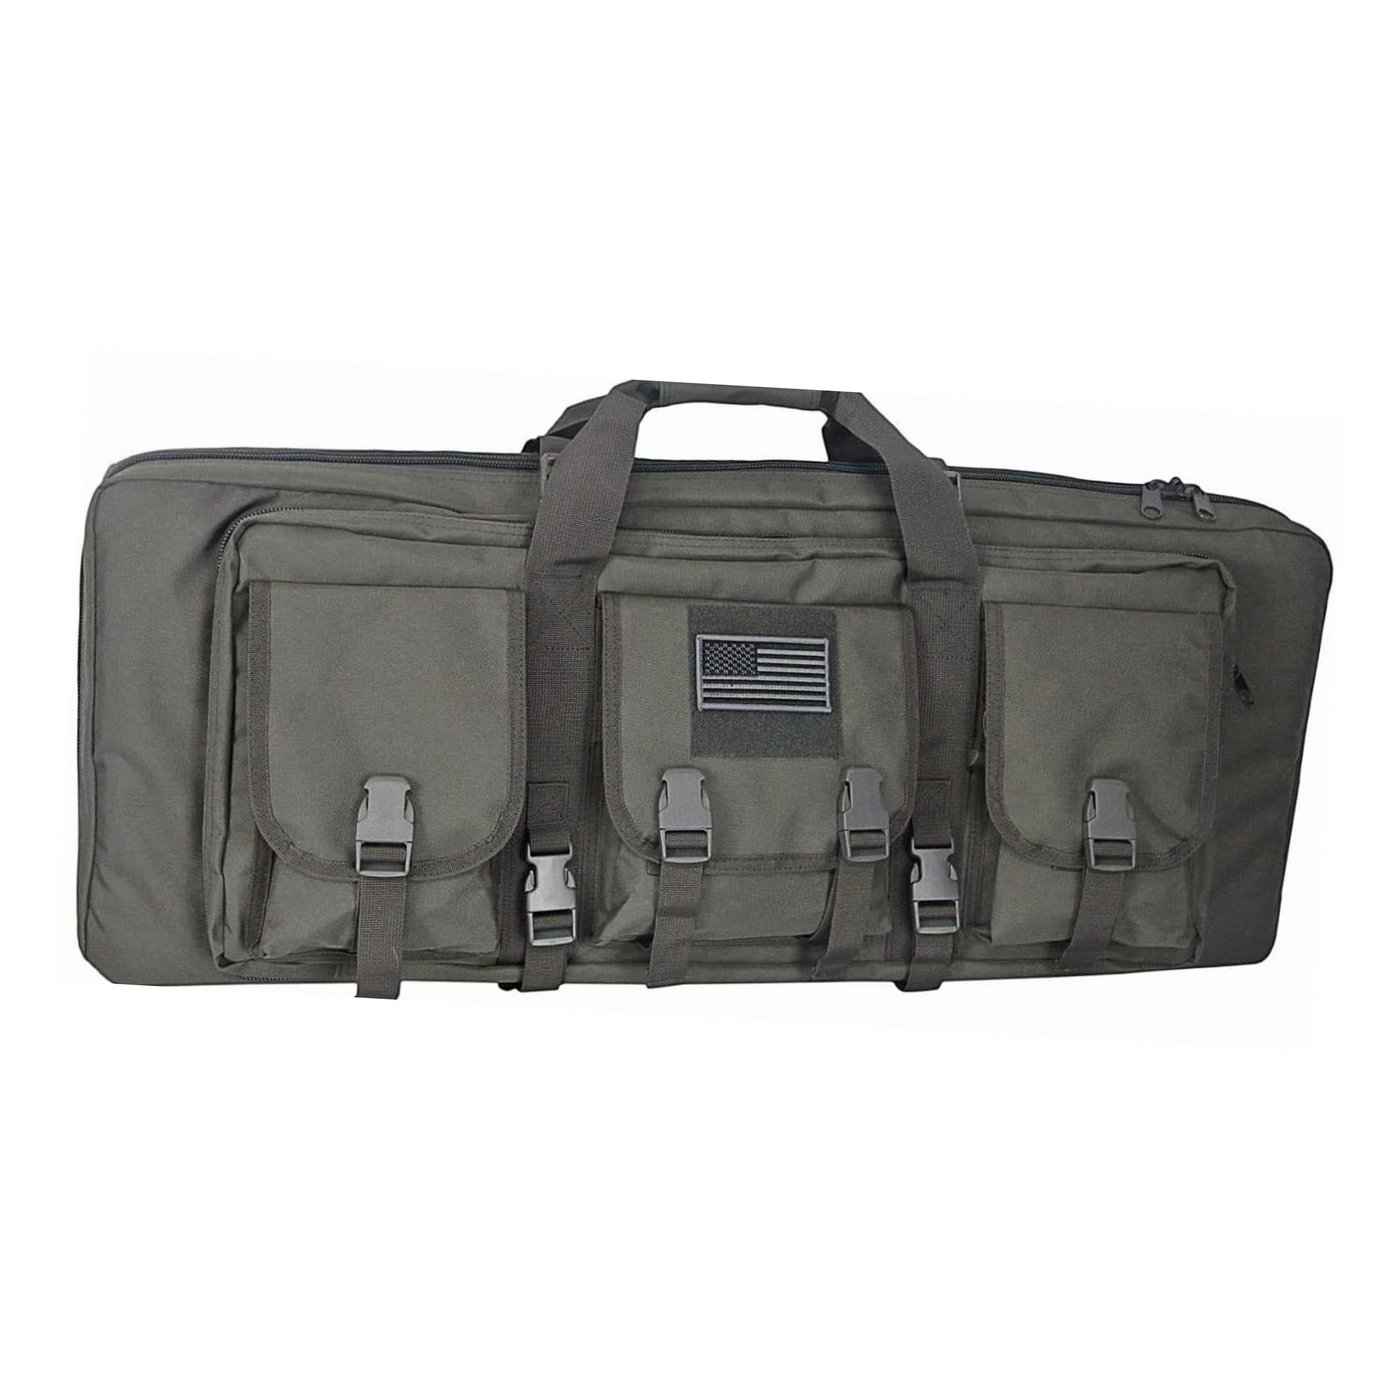 Waterproof padded hunting rifle case with dual compartments for American Classic tactical firearms